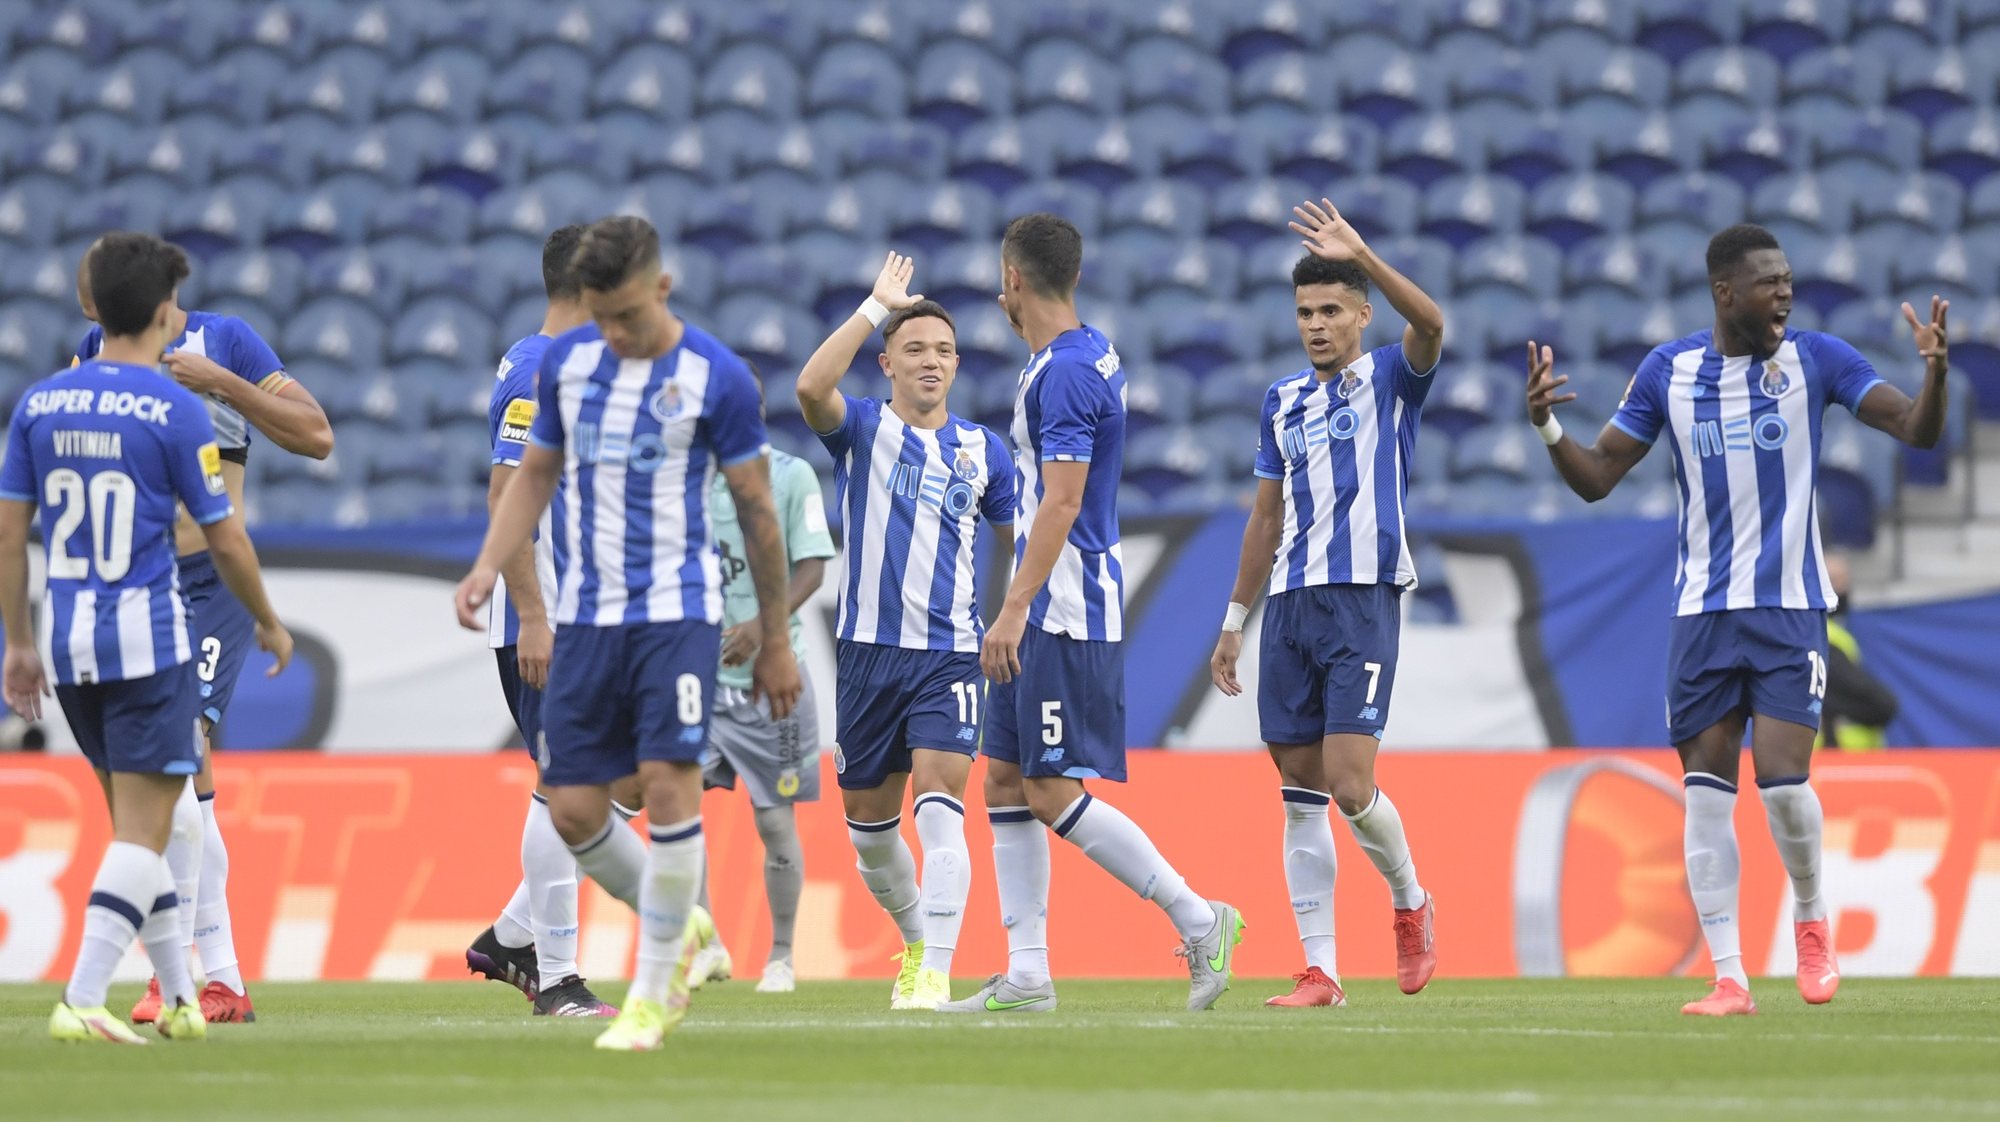 FC Porto&#039;s players celebrate a goal scored to Arouca, during their Portuguese First League soccer match held at Dragao stadium in Porto, northwest of Portugal, 28 august 2021. FERNANDO VELUDO/LUSA